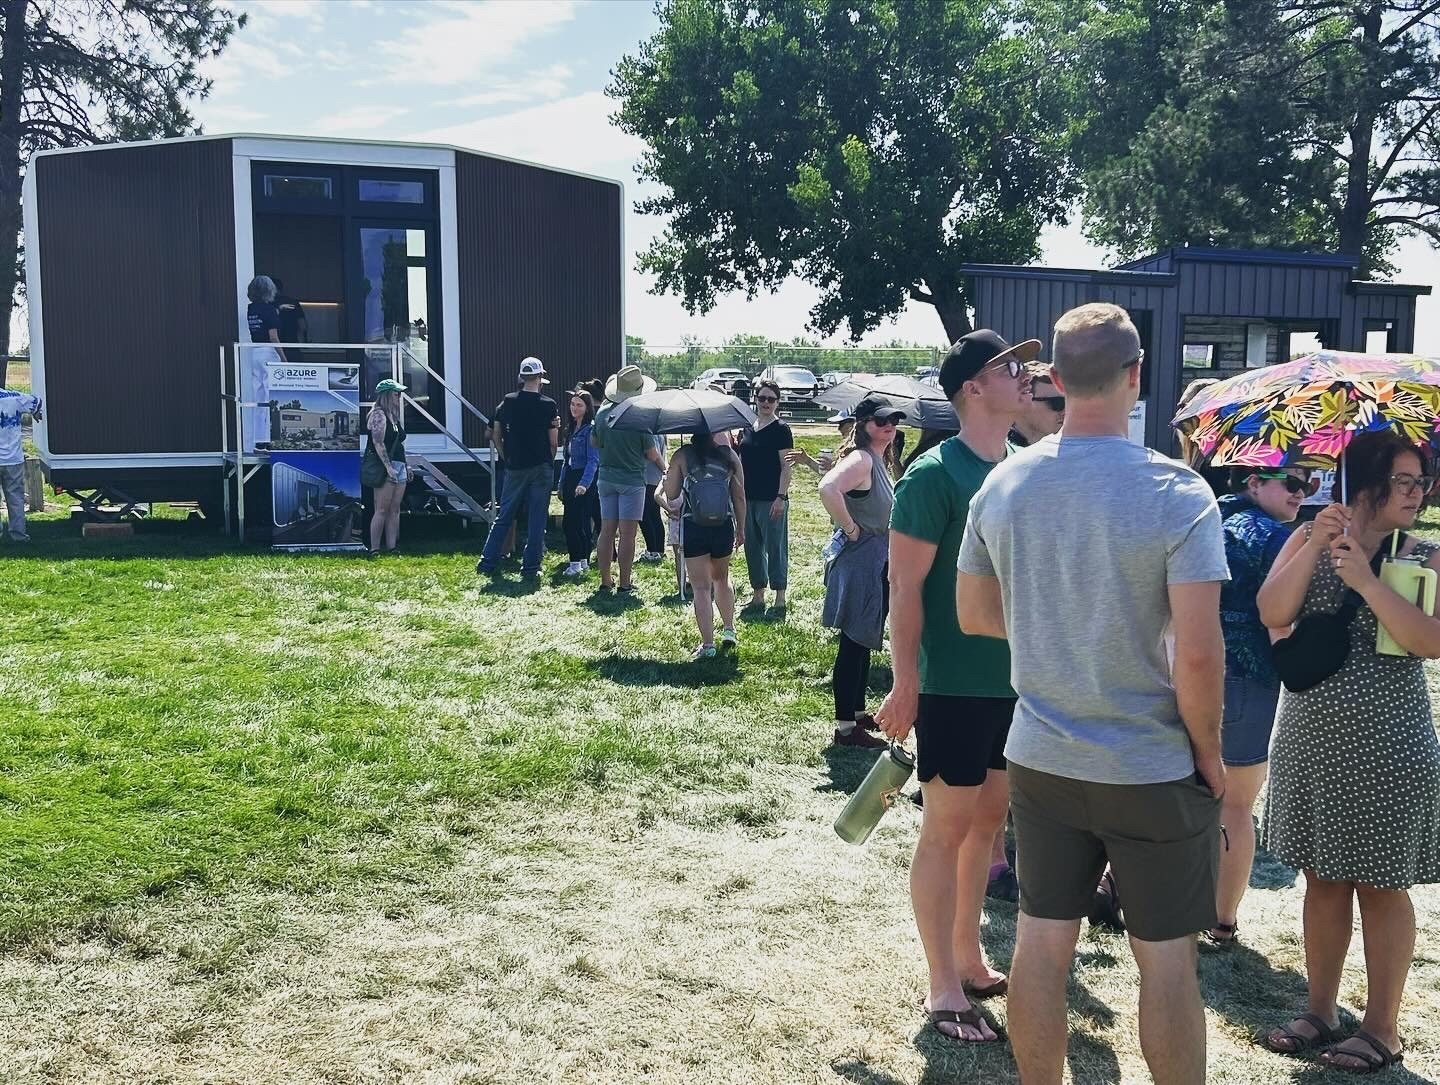 People lined up to see our X180 more unit this weekend at the Colorado Tiny House Festival.